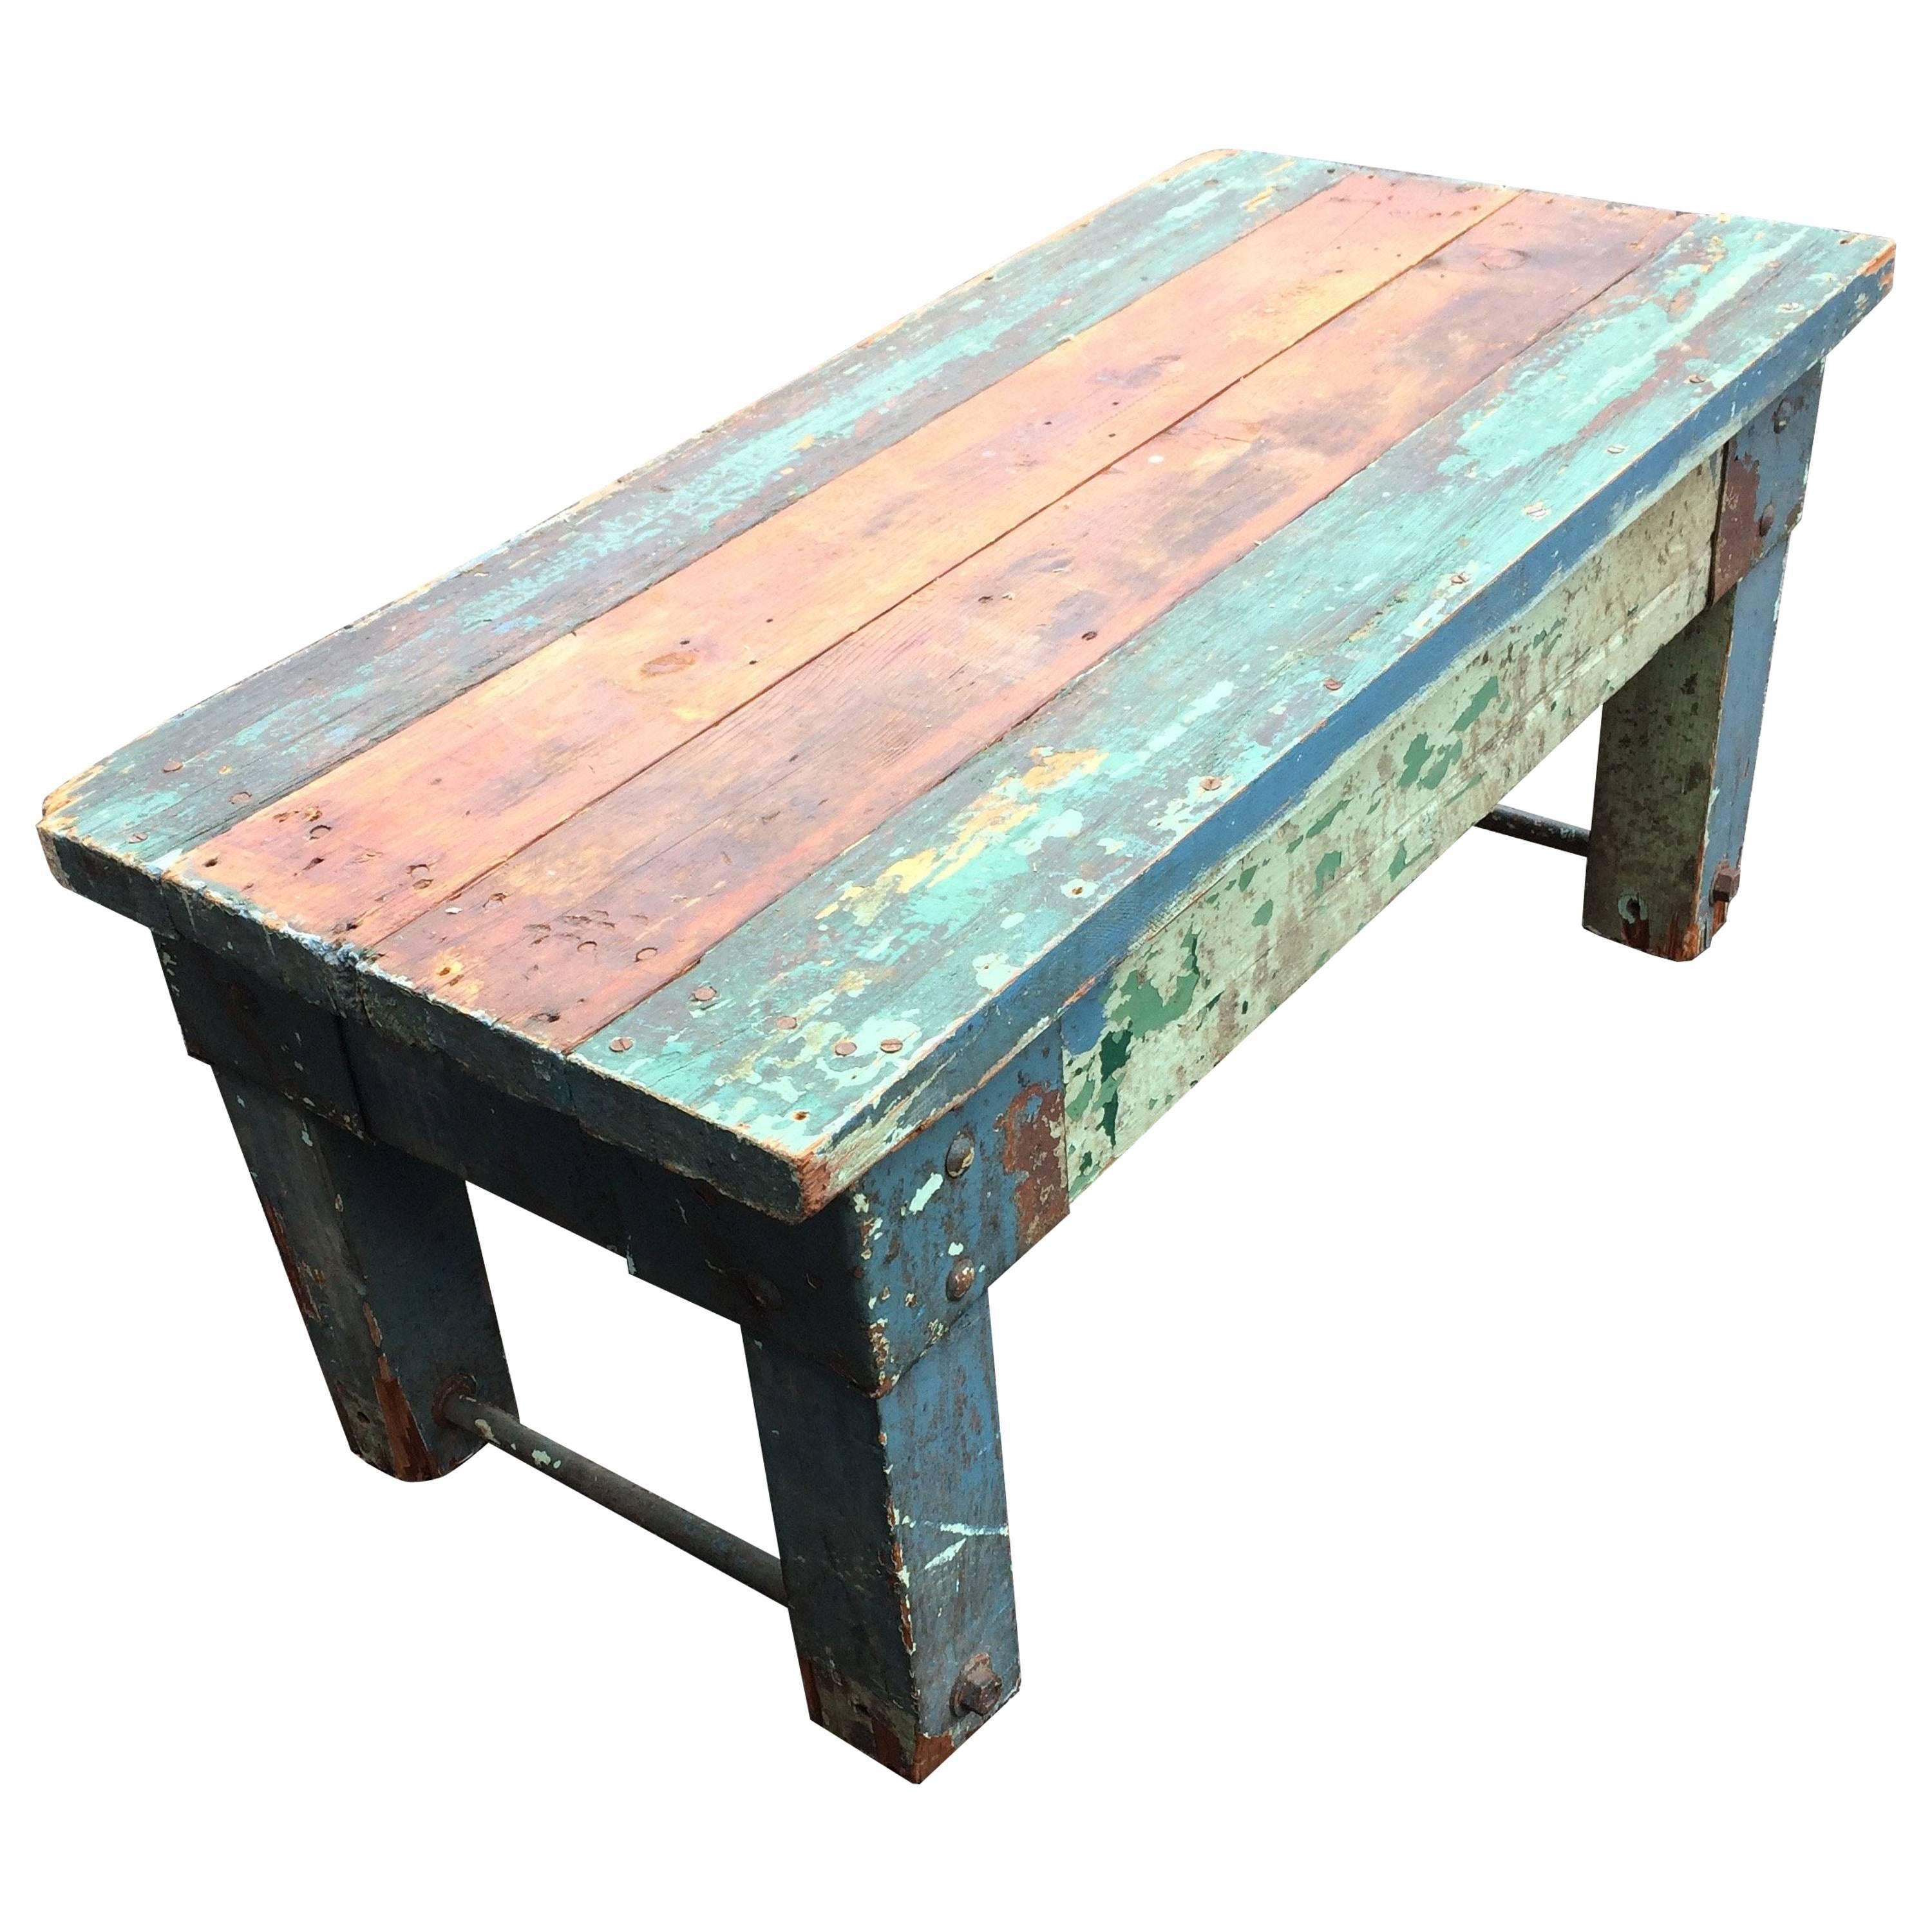 Primitive and Gorgeous Painted Reclaimed Wood Bench